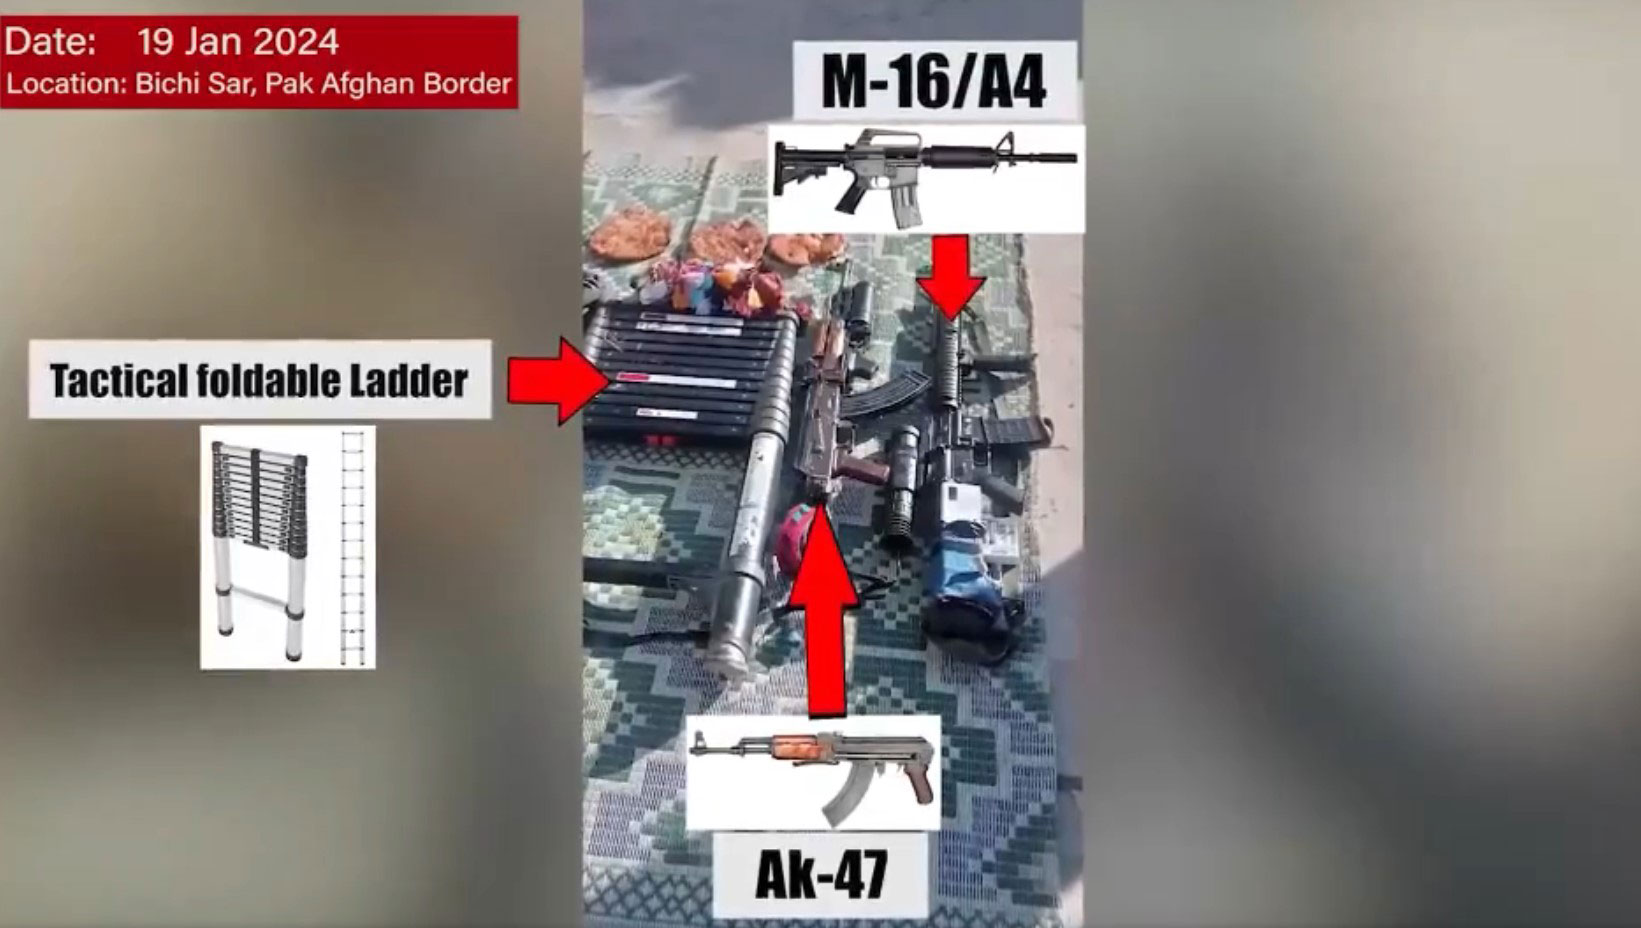 An image showing various weapons, equipment  confiscated from terrorists.  — Reporter